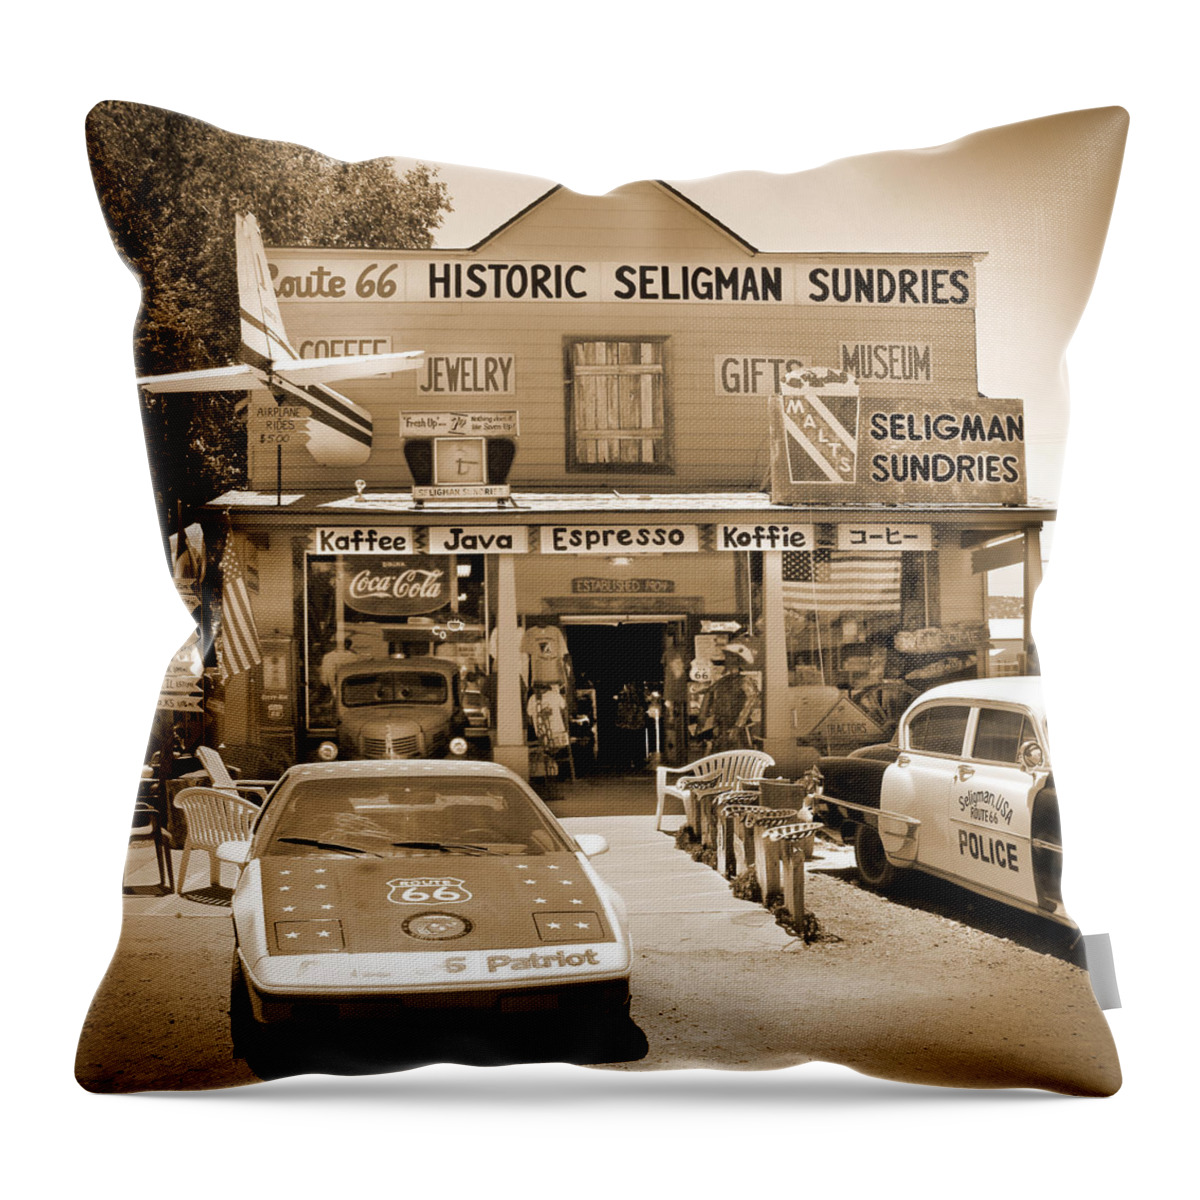 Plane Throw Pillow featuring the photograph Route 66 - Historic Sundries by Mike McGlothlen